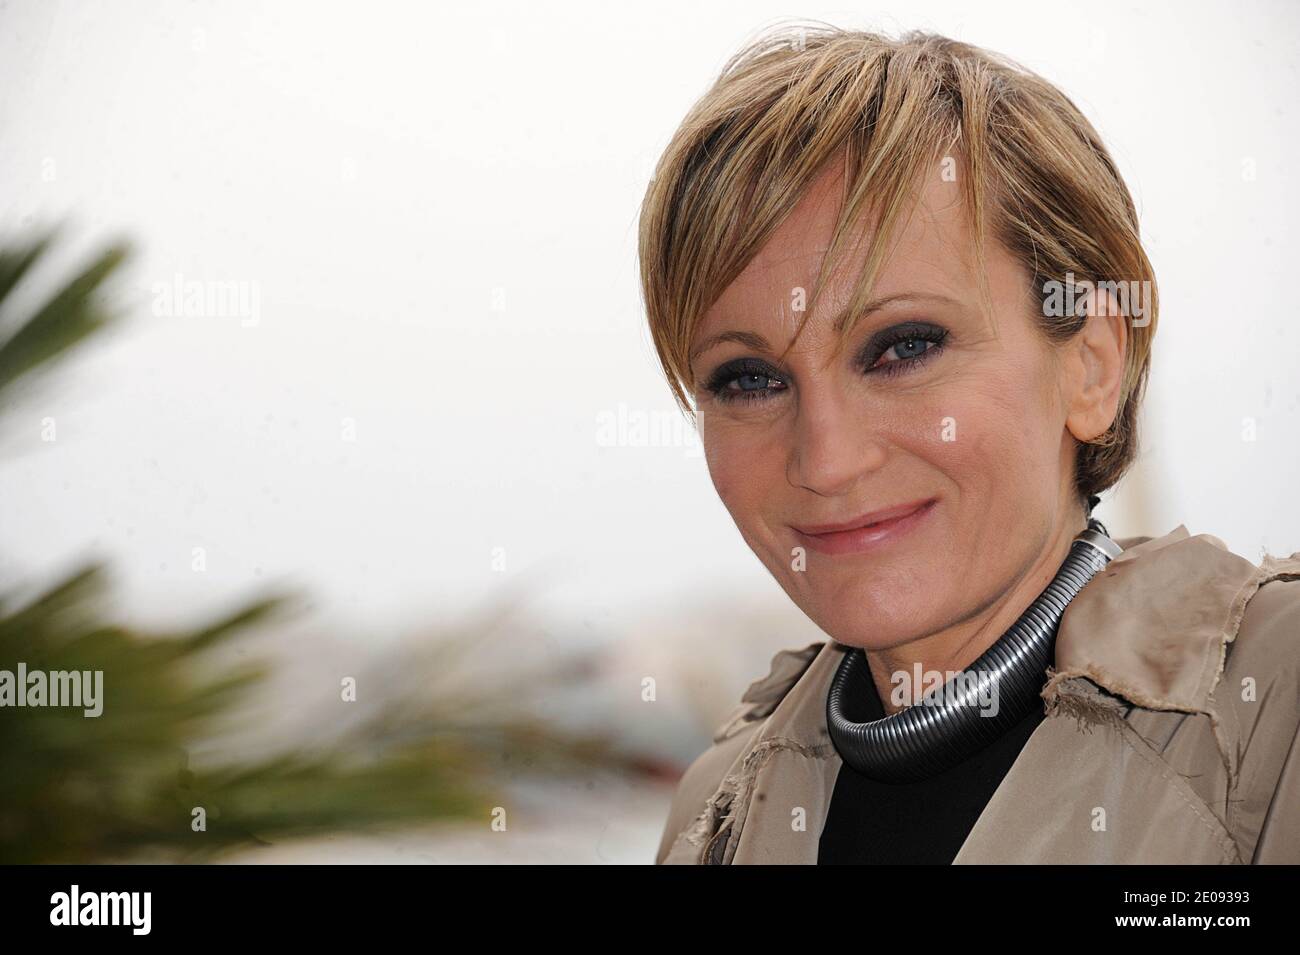 French singer Patricia Kaas to give a concert in Armenia